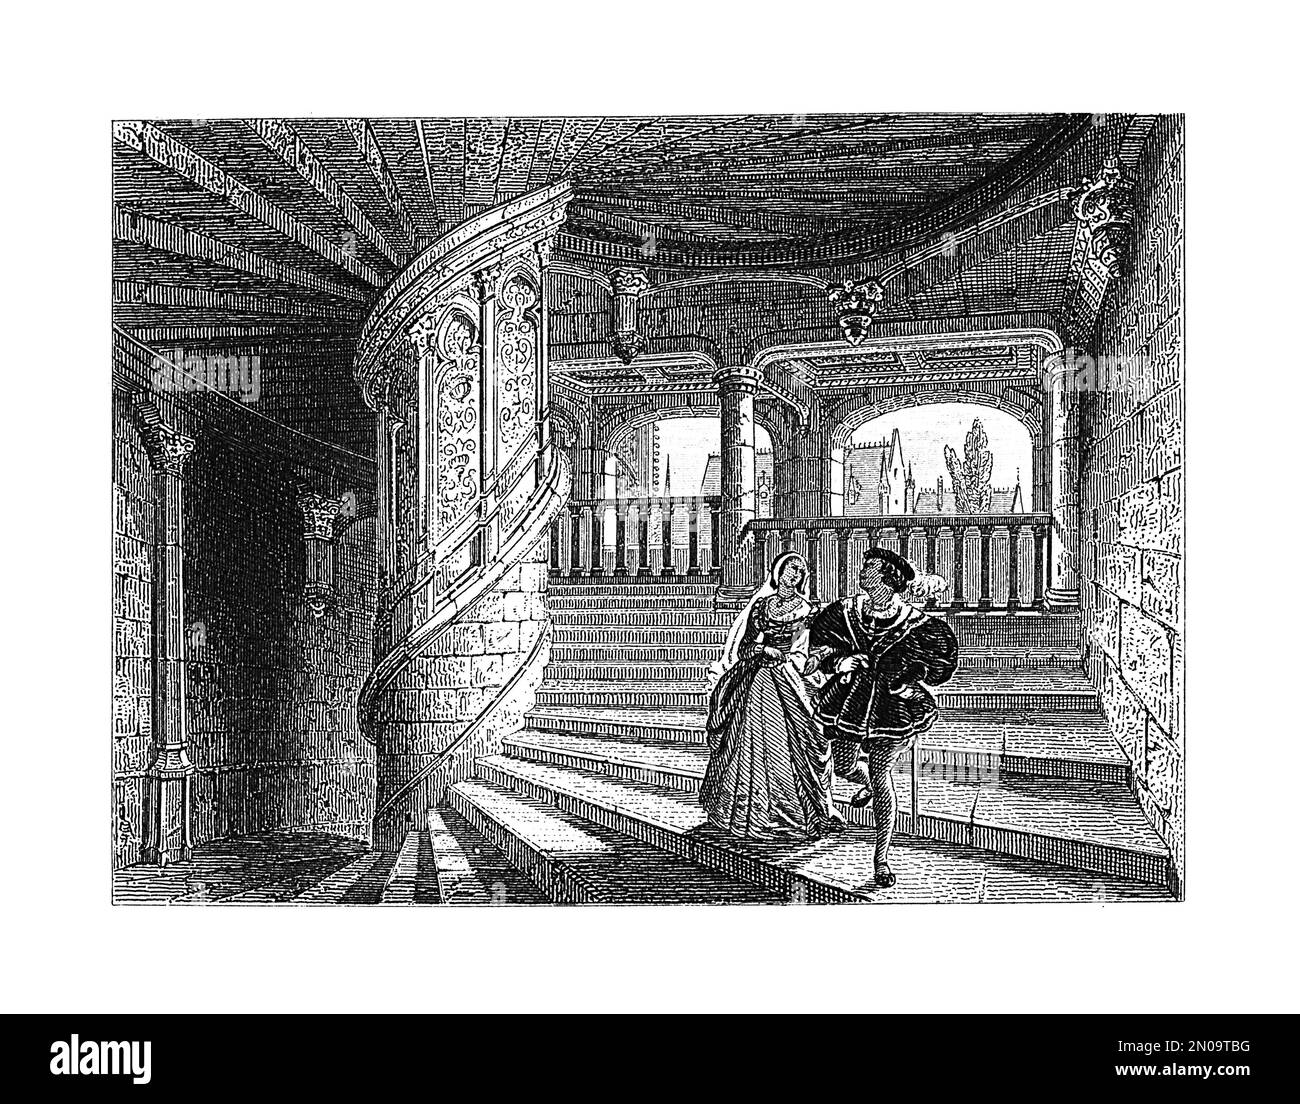 Antique 19th-century engraving depicting the stairway of the Chateau de Chateaudun in France. Illustration published in Systematischer Bilder Atlas Stock Photo